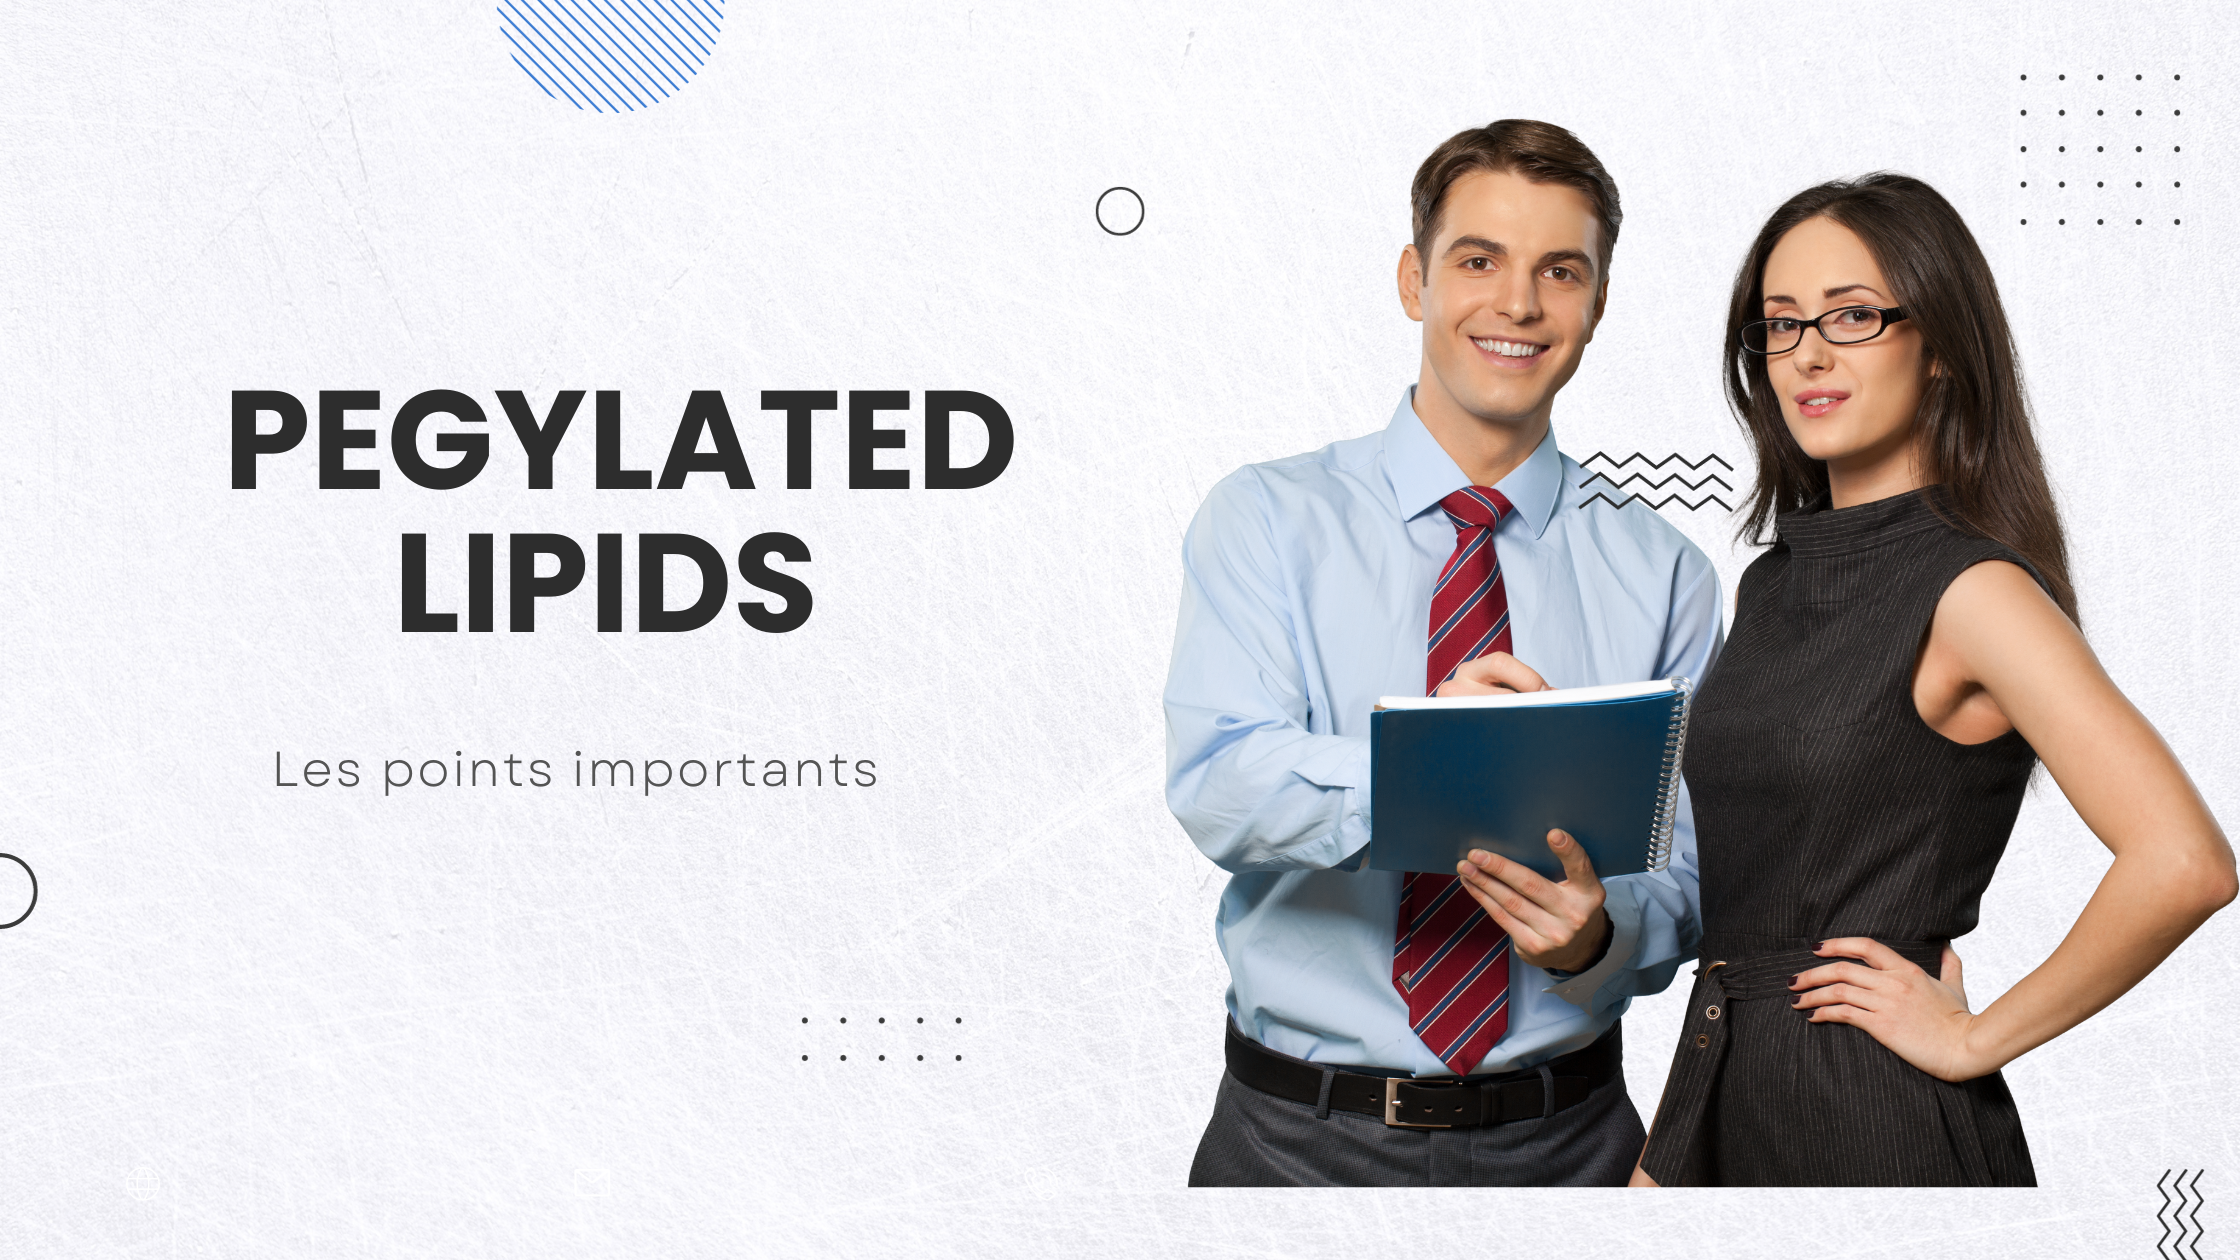 pegylated lipids | Les points importants